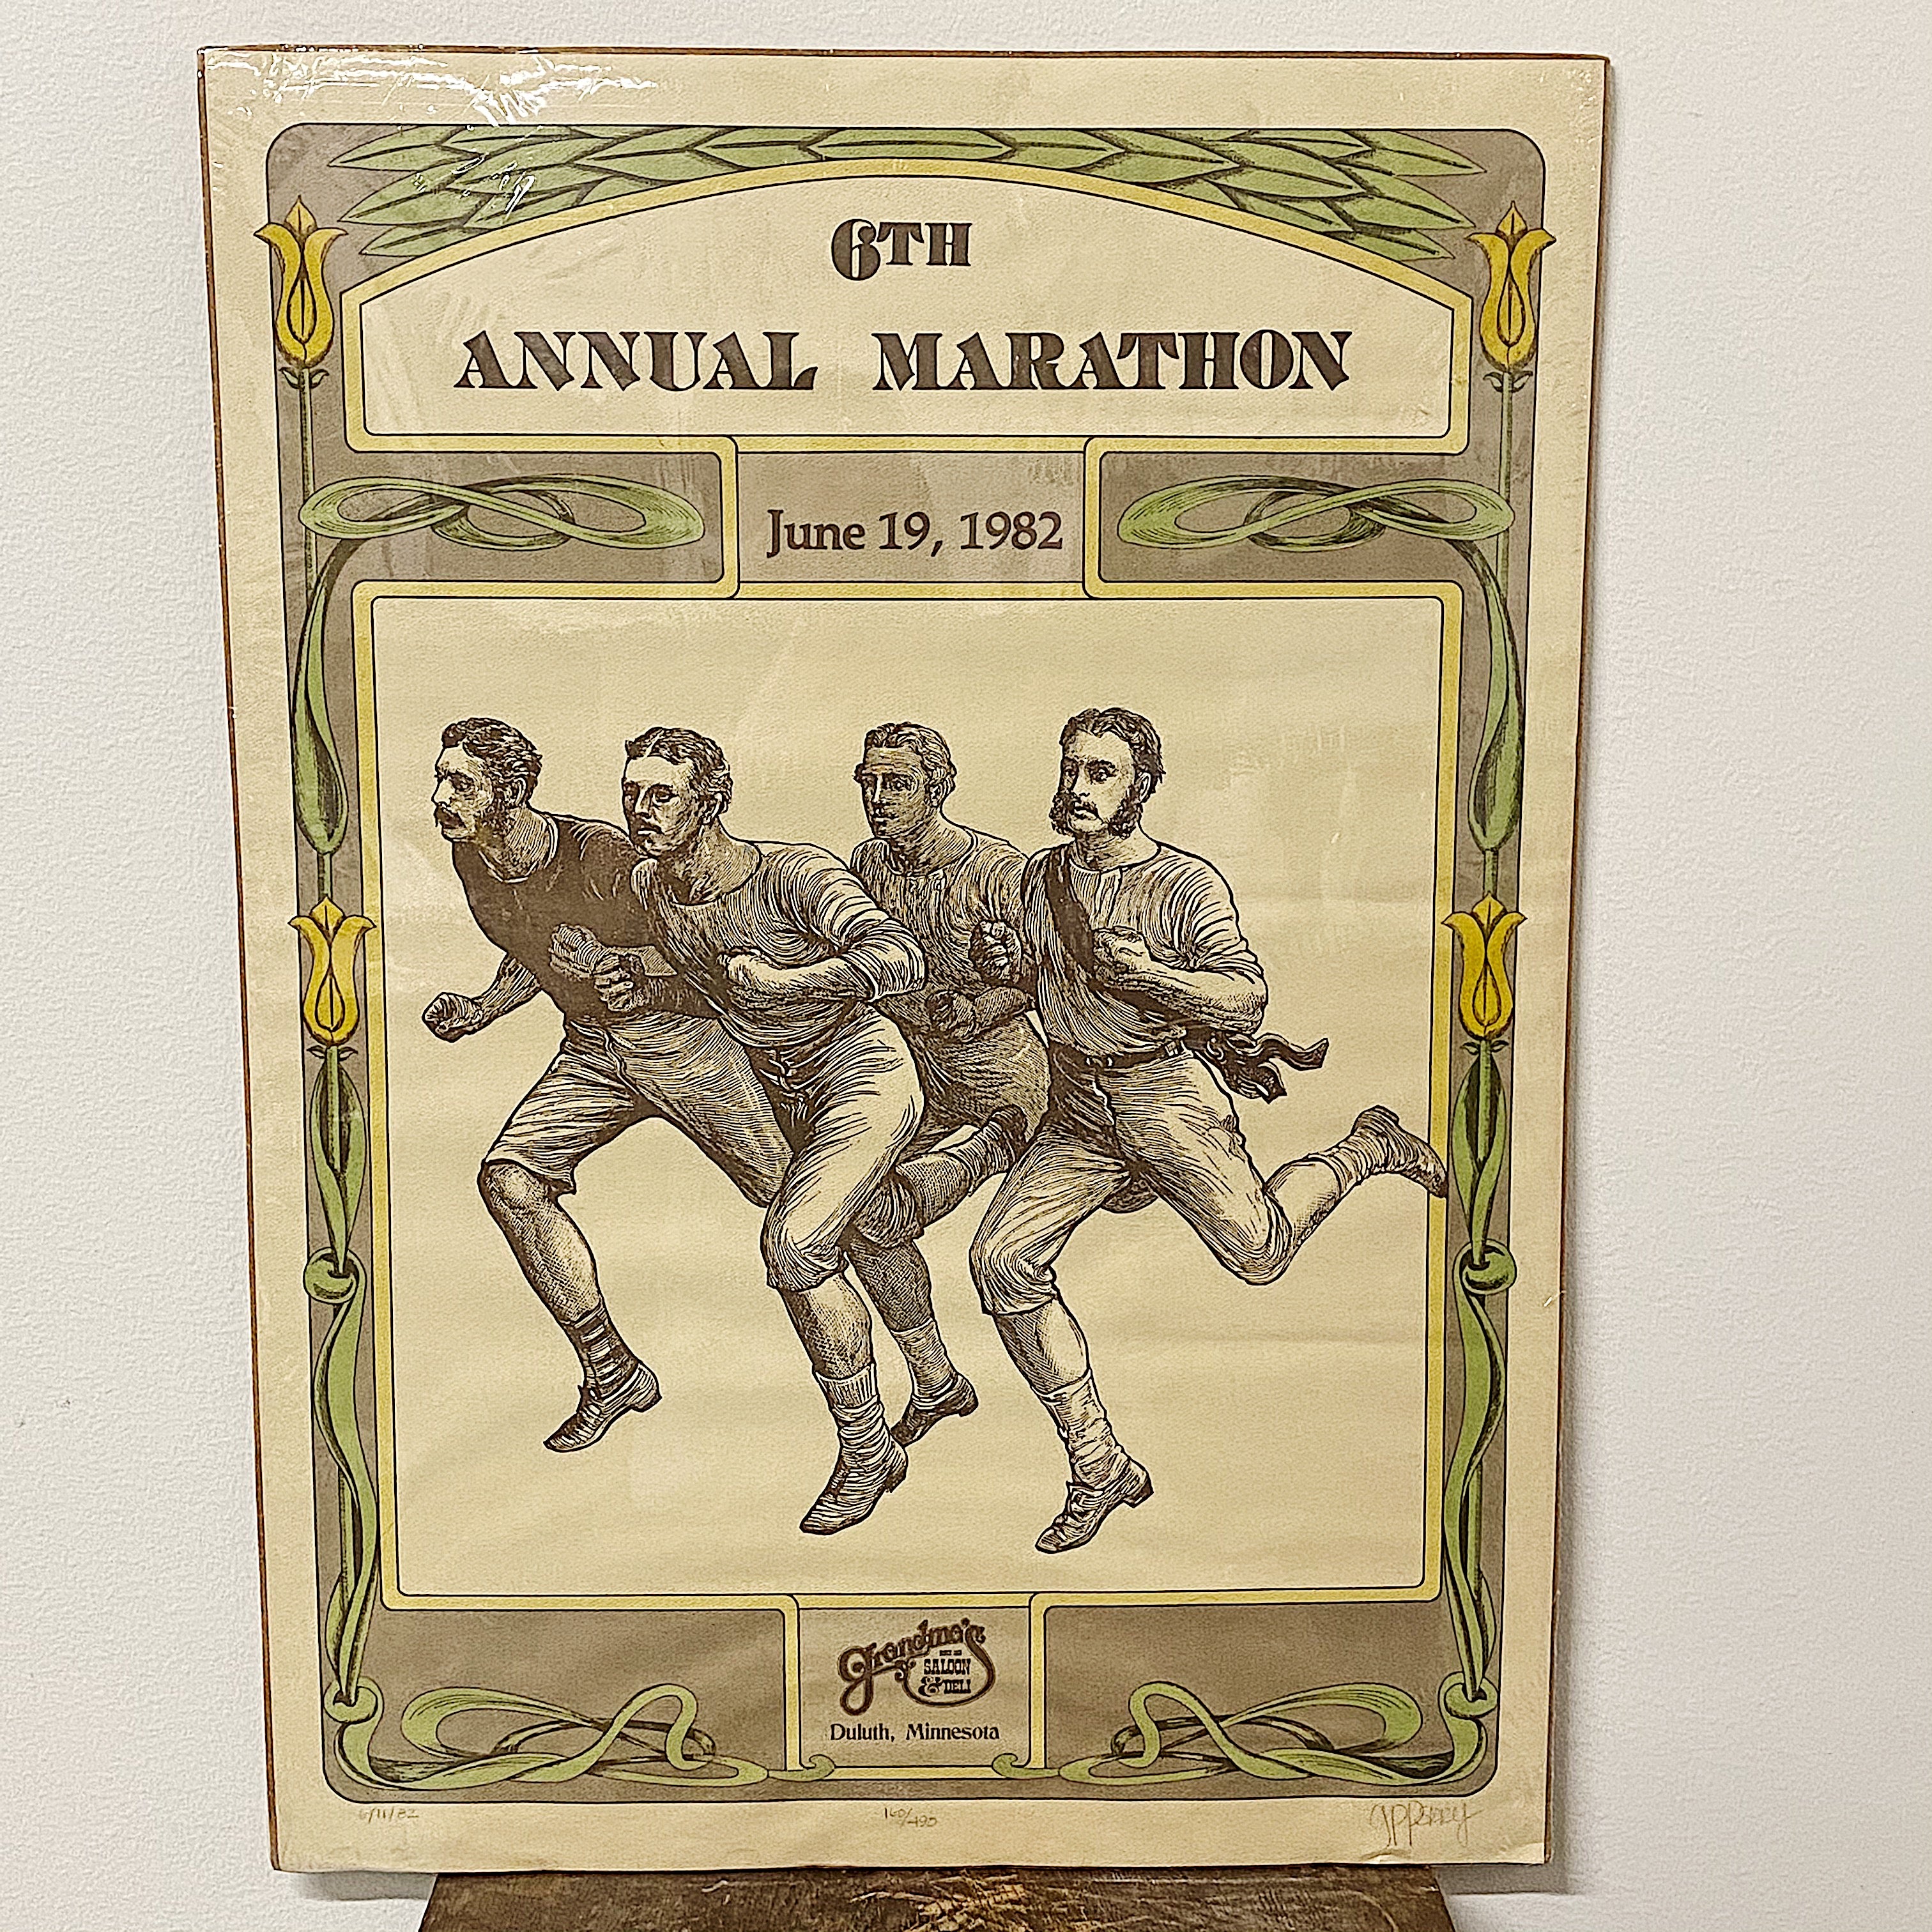 Rare Duluth Marathon Poster from 1982 - Limited Edition Signed Grandma's Marathon Lithograph - 6th Annual Run - 140 of 490 - Old Timey Image Cool